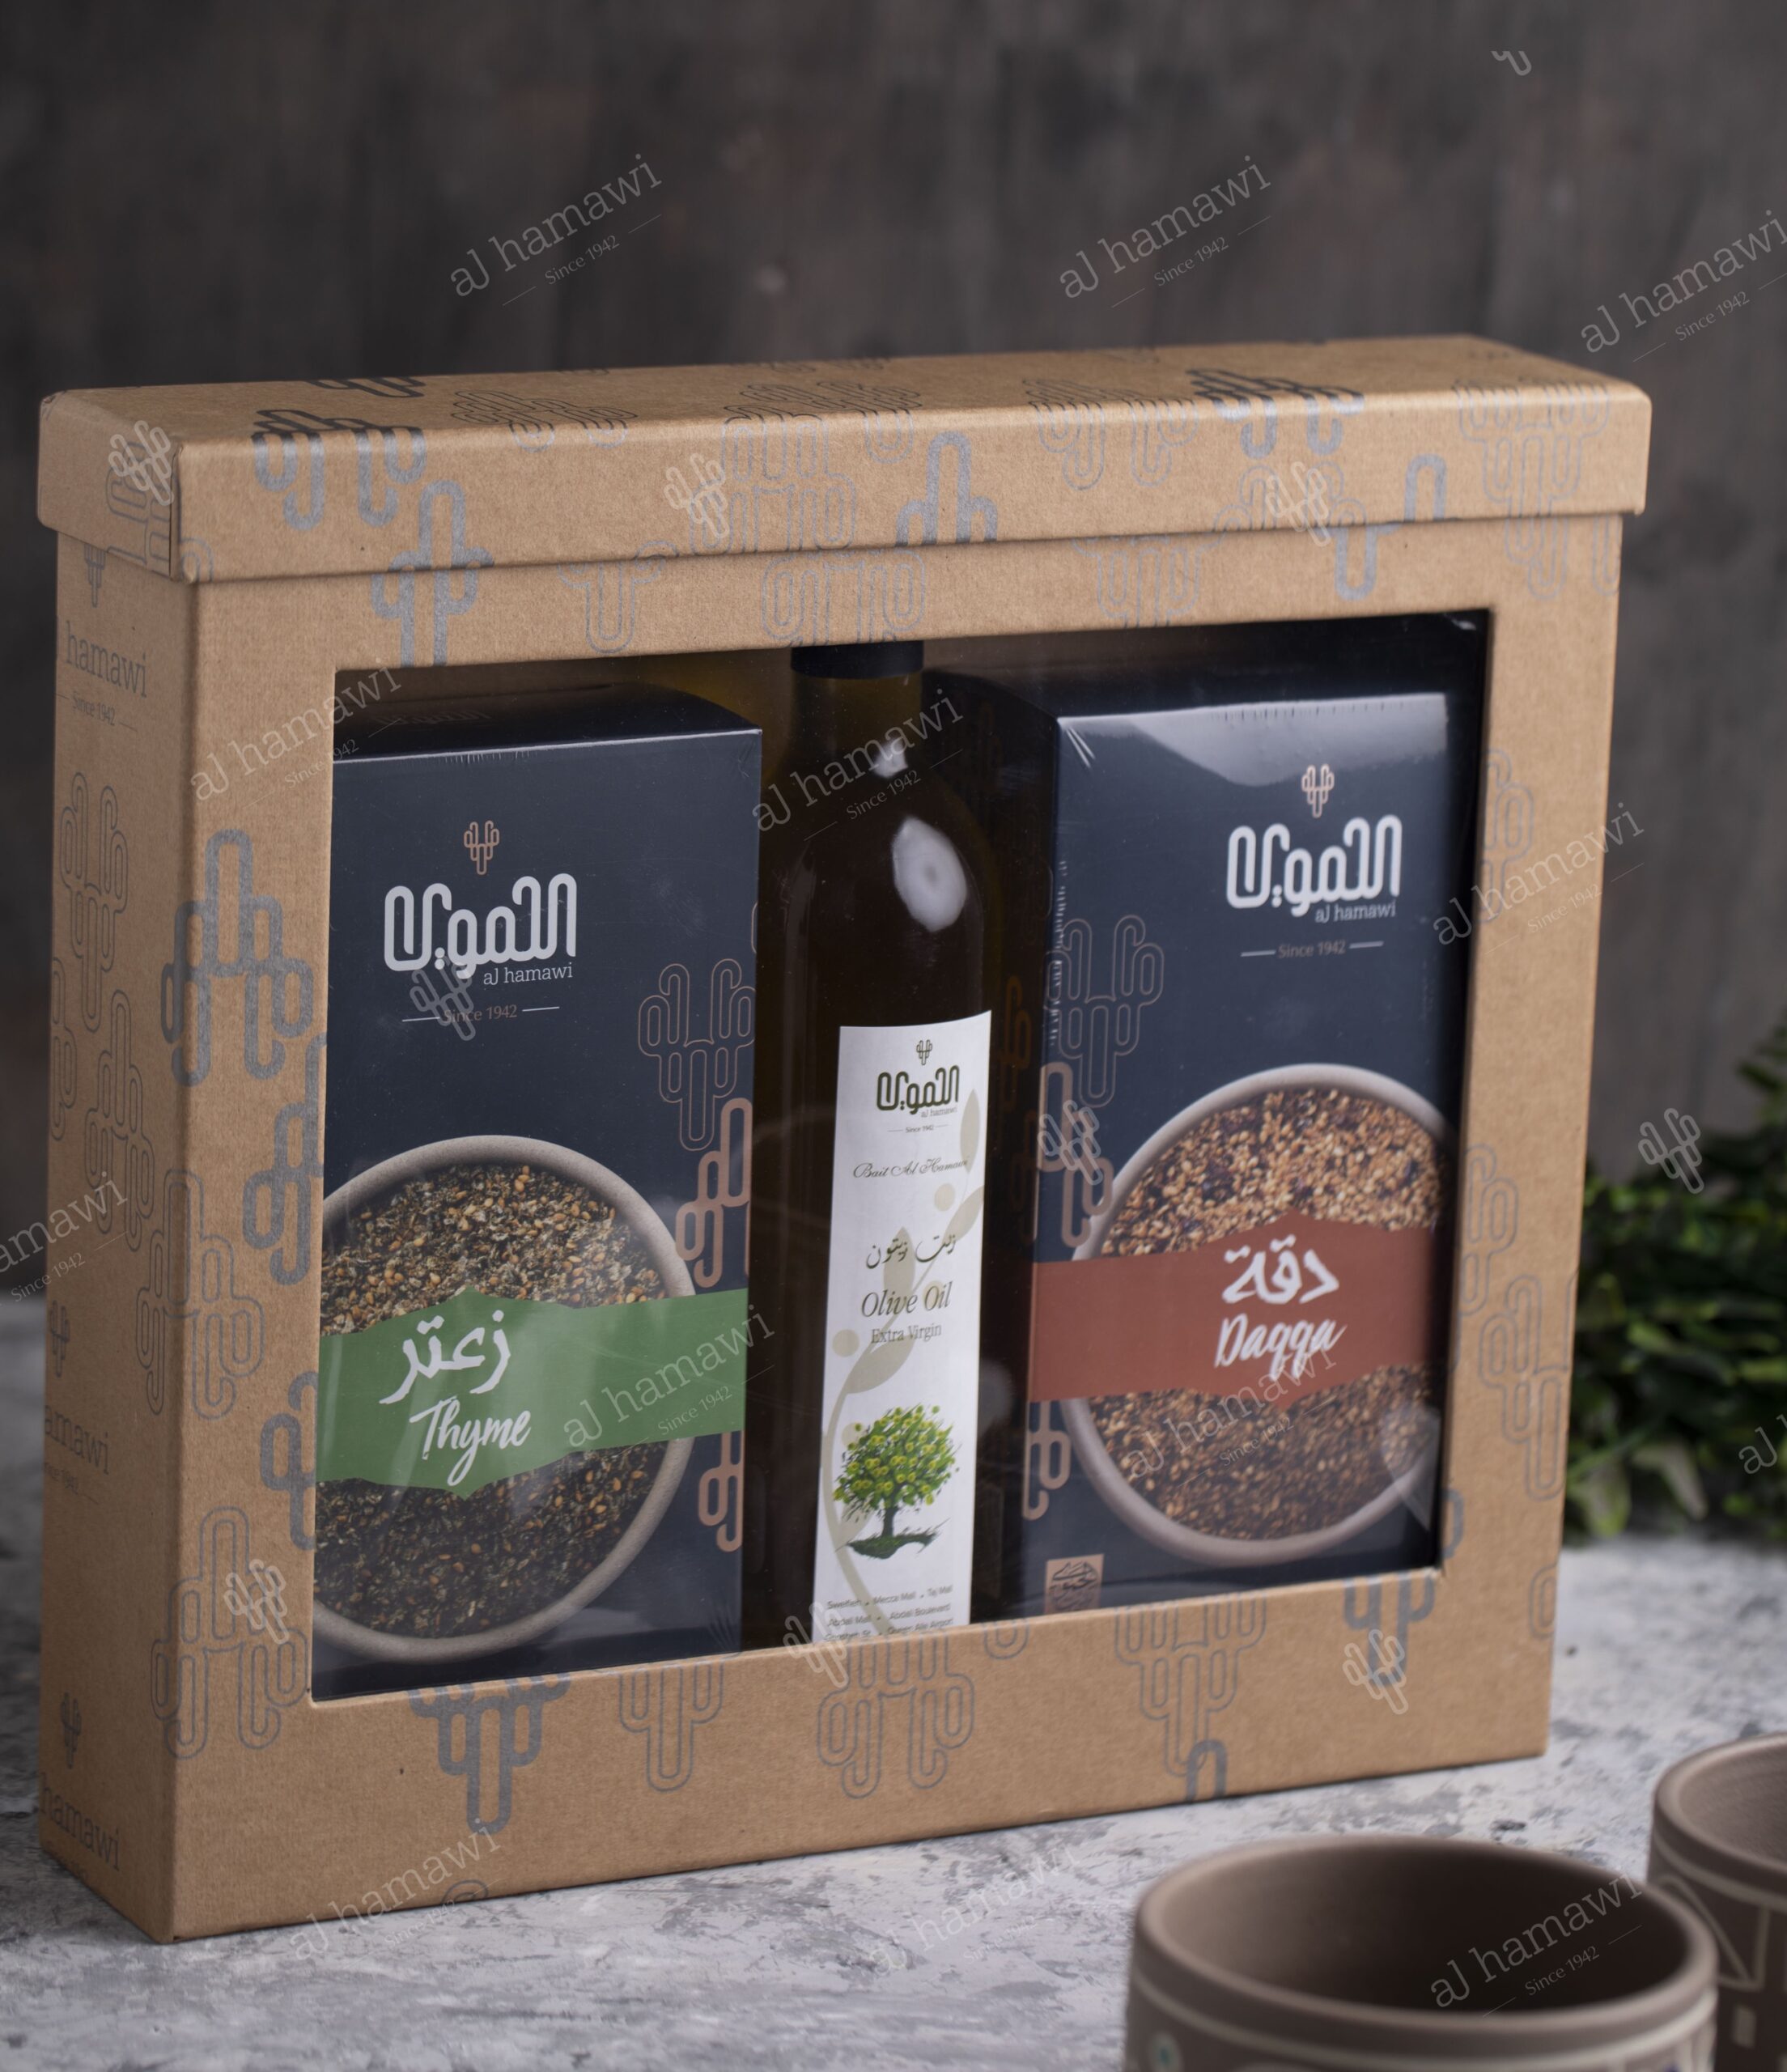 Thyme, Duqqa, and Olive Oil Box